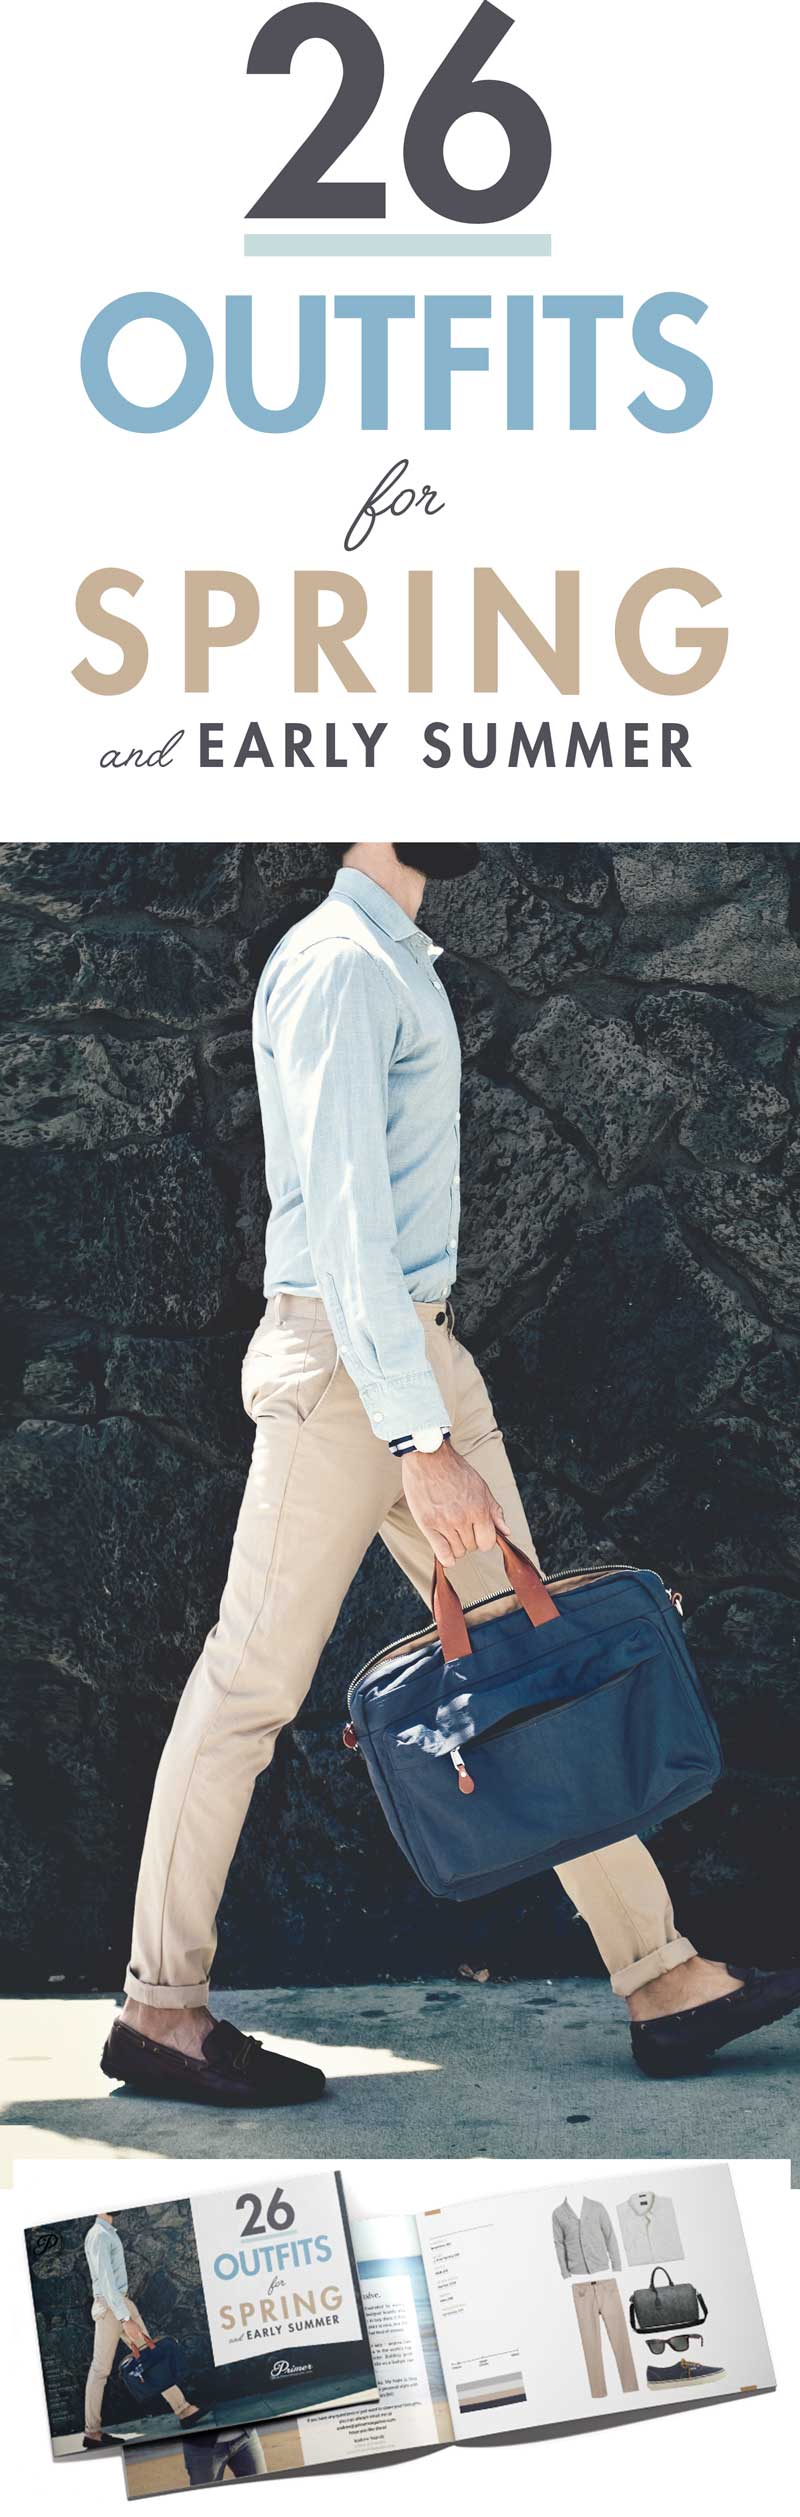 26 Outfits for Spring & Early Summer   Men's Fashion Inspiration   Outfit Ideas